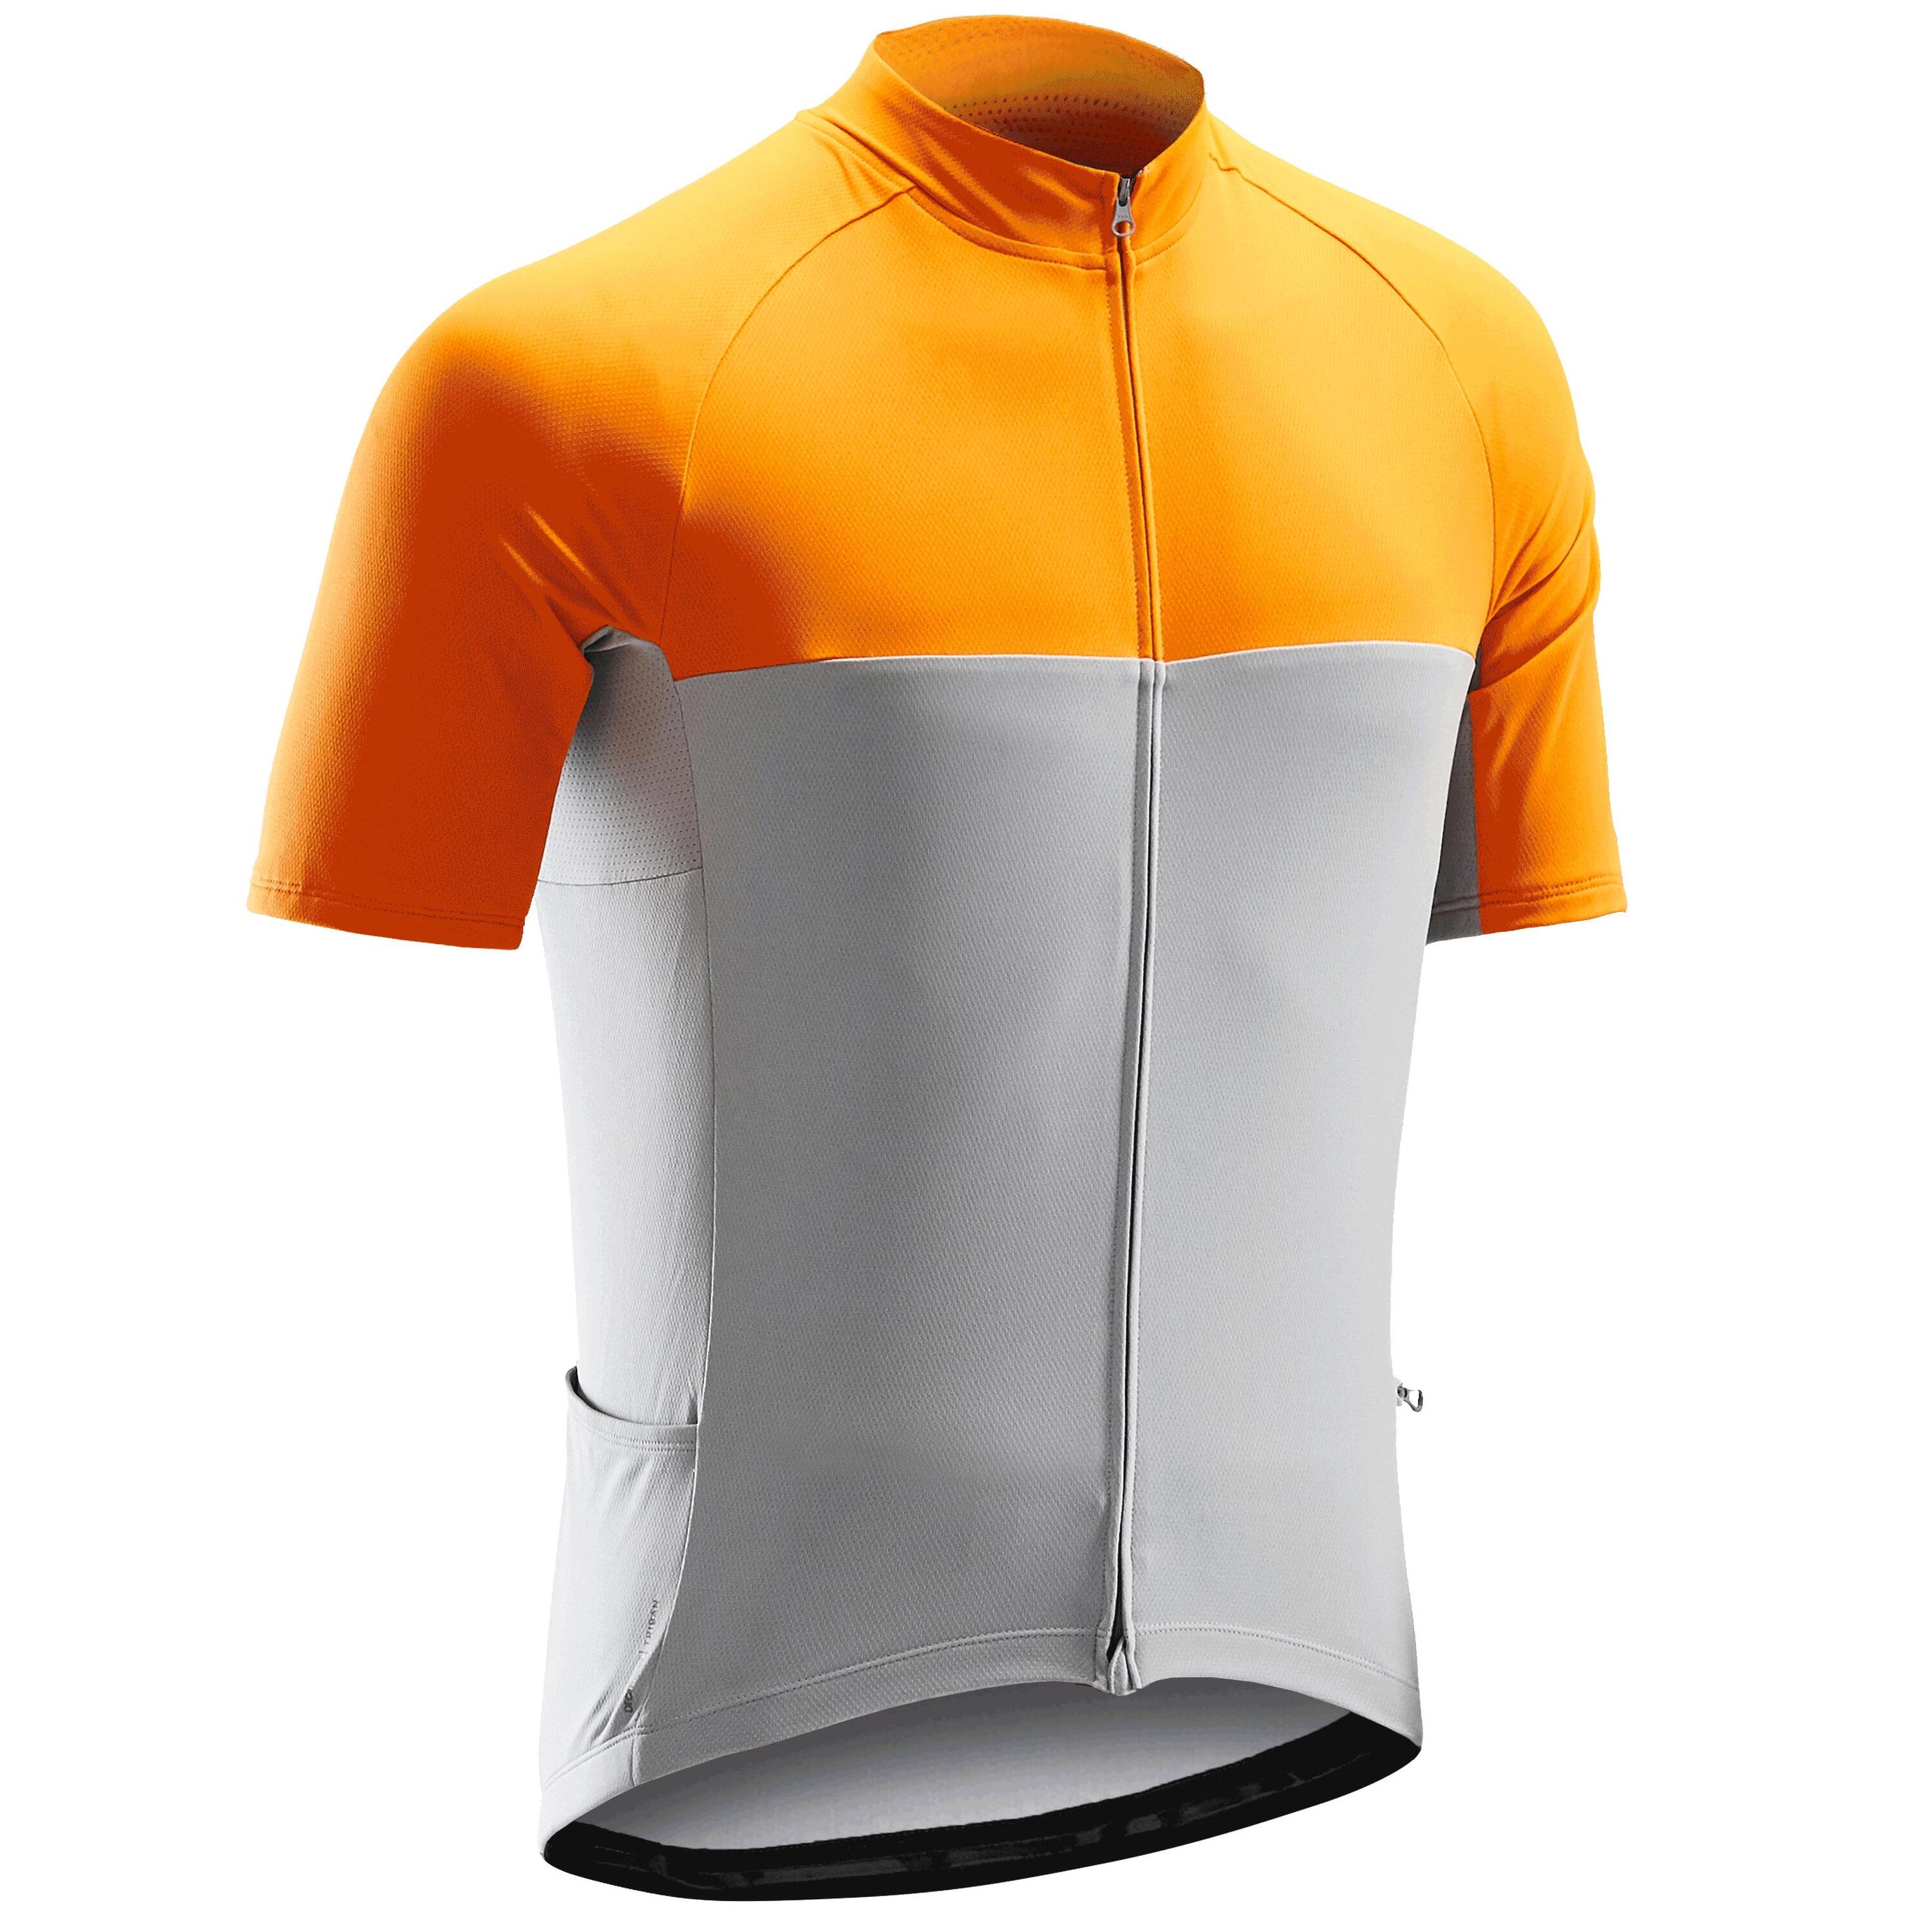 TRIBAN RC100 Short-Sleeved Warm Weather Road Cycling and Touring Jersey - Grey/Orange